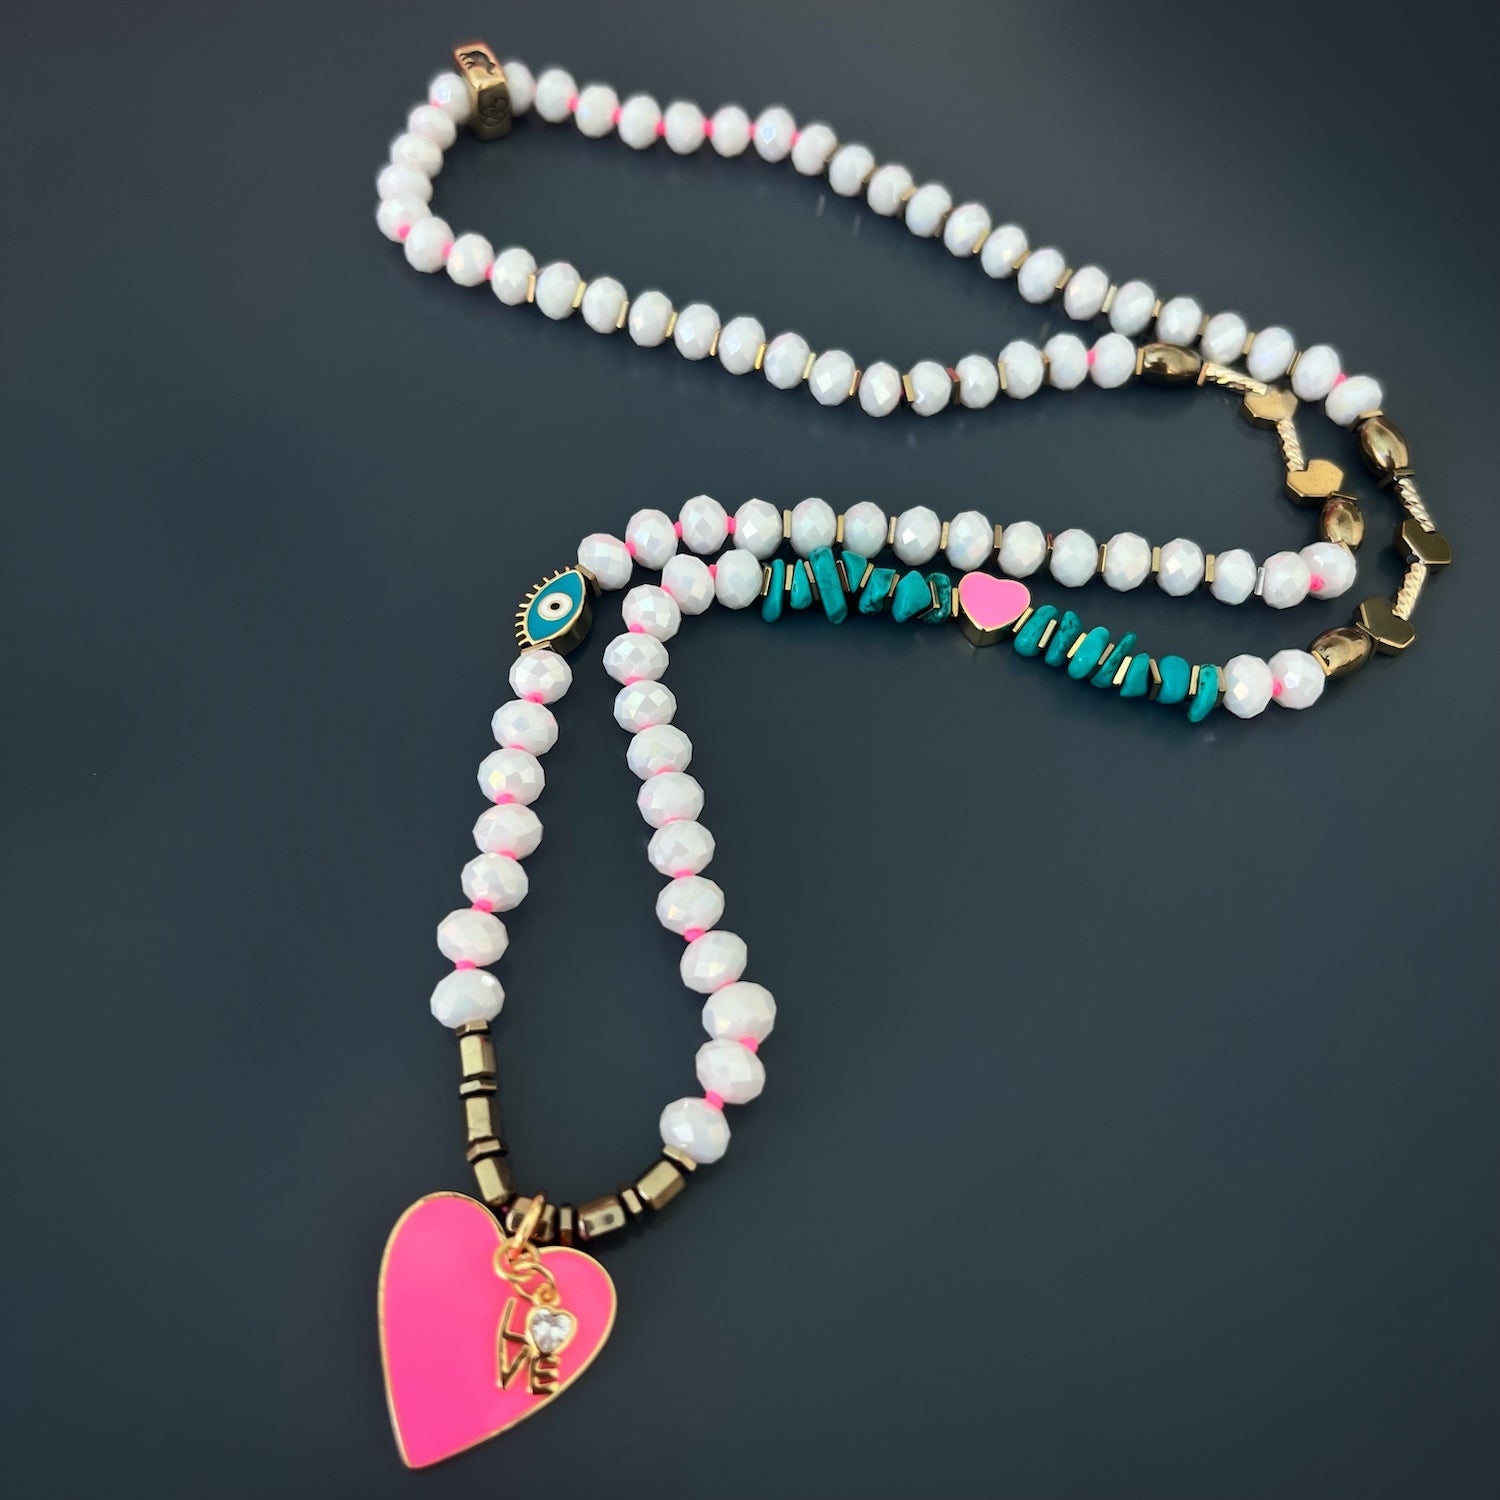 The 18K gold plated pink enamel heart pendant and love charm add a romantic touch to the design.